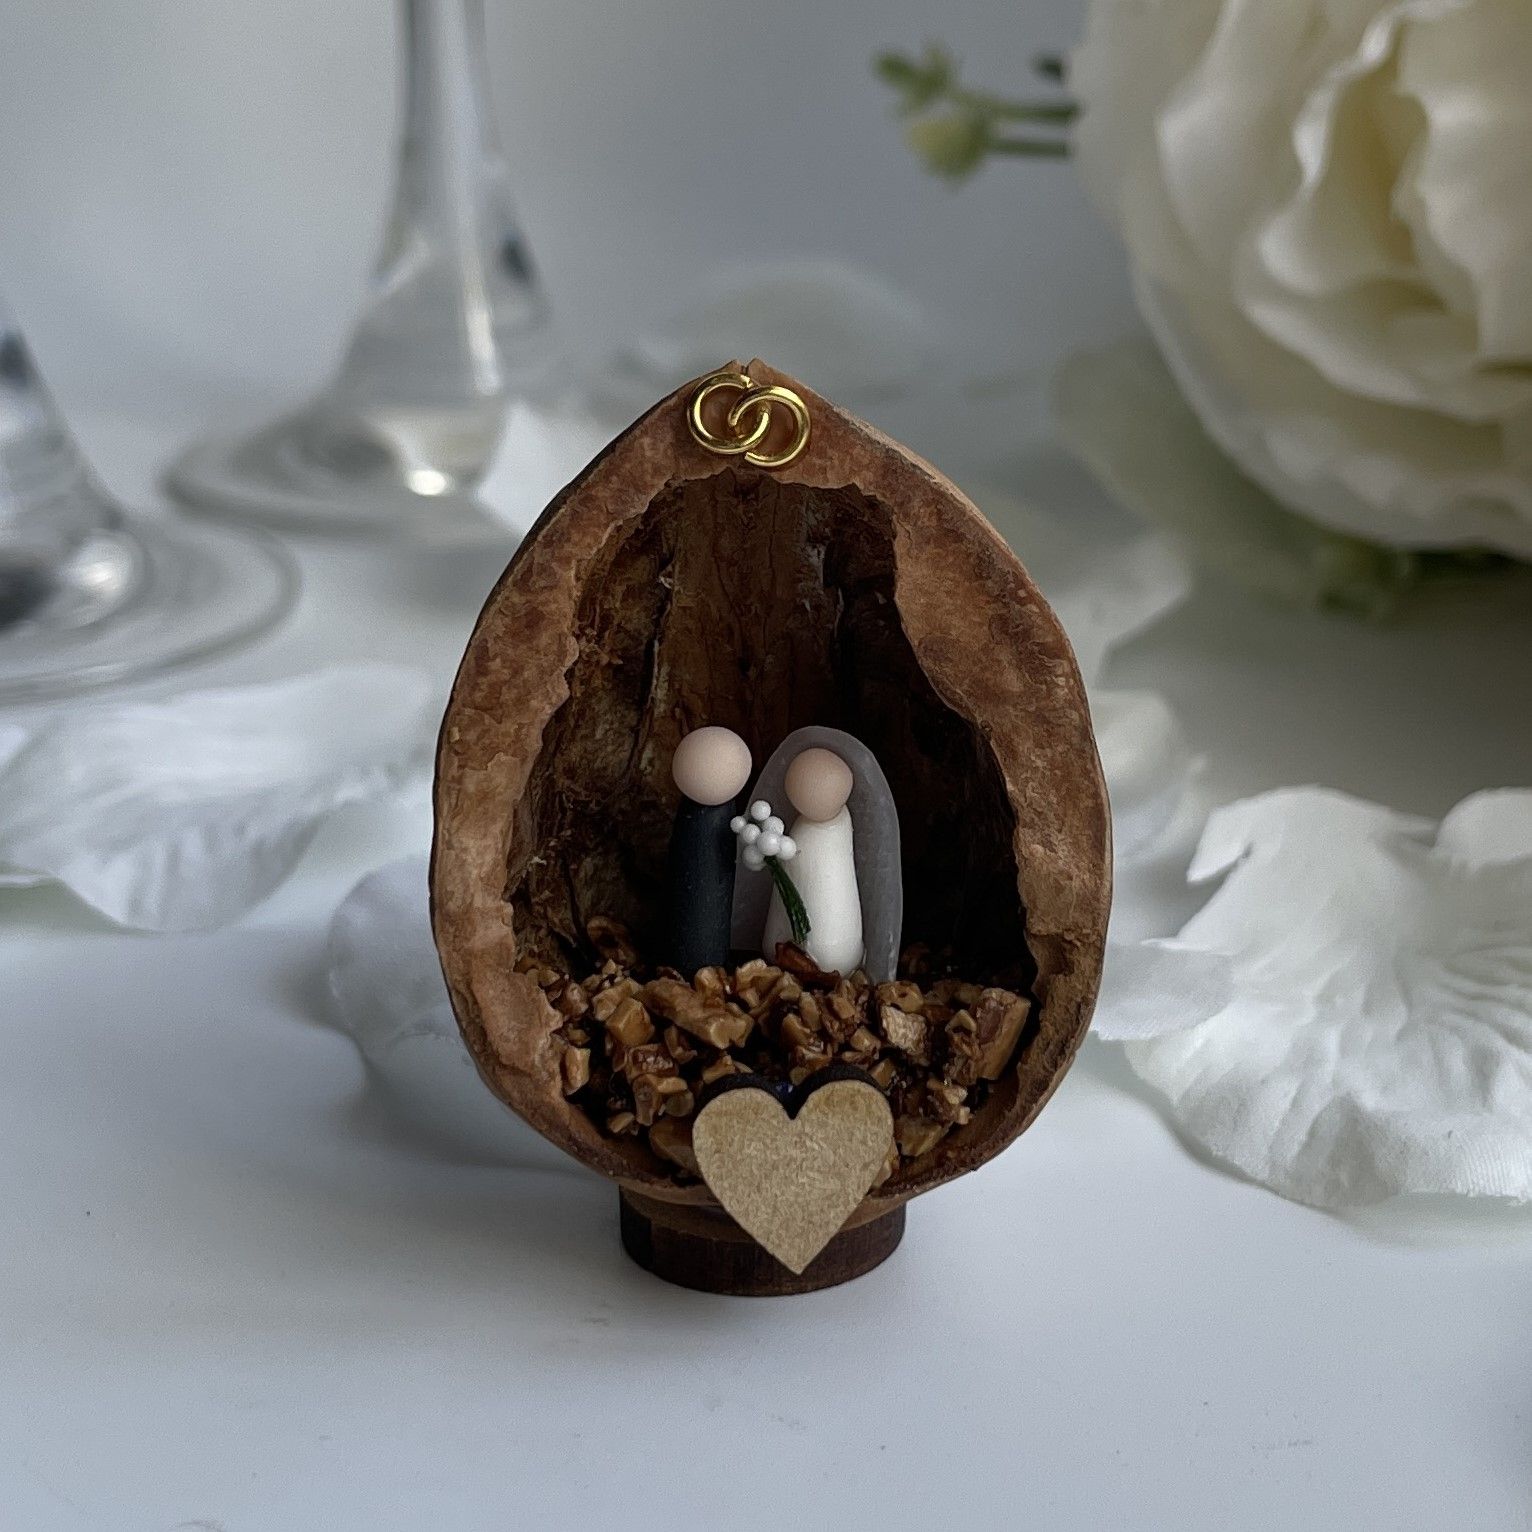 Image shows a walnut shell decoration on a table with flowers and champagne flutes. The decoration contains tiny figures of a bride and groom with two gold rings at the top and a wooden heart at the base.